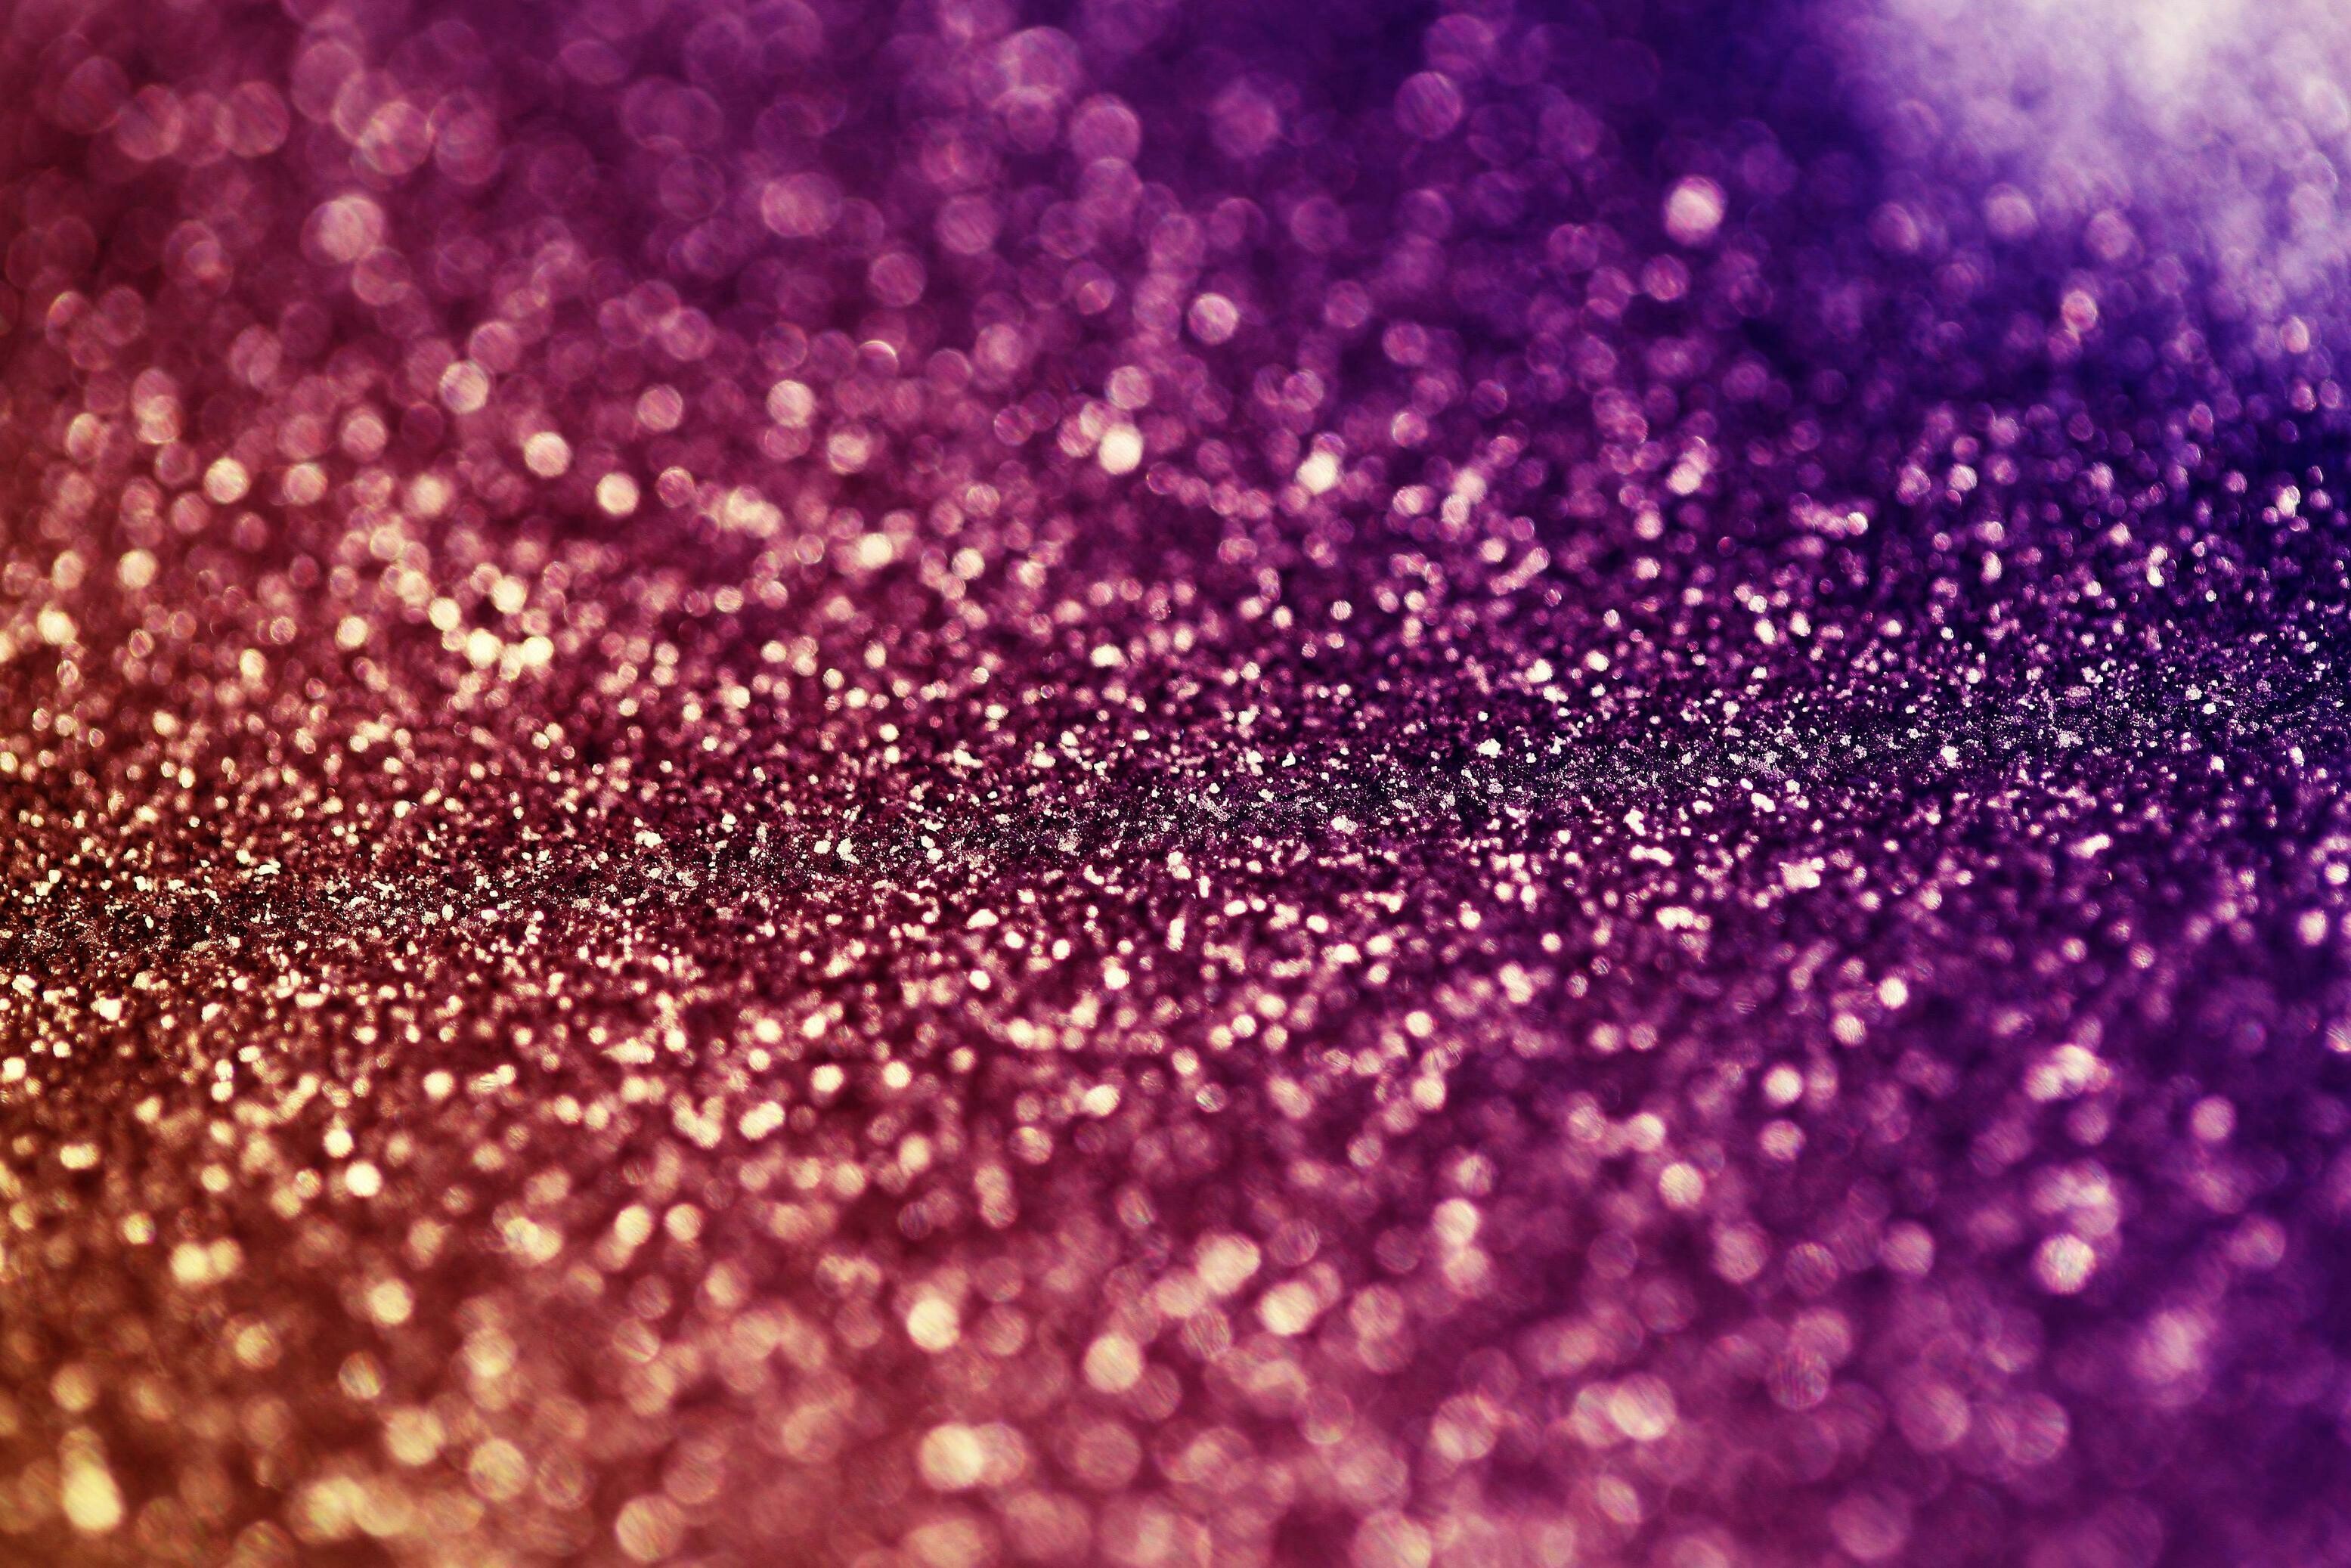 Sparkle: Has bright and eye-catching appearance, Shiny. 3110x2080 HD Background.